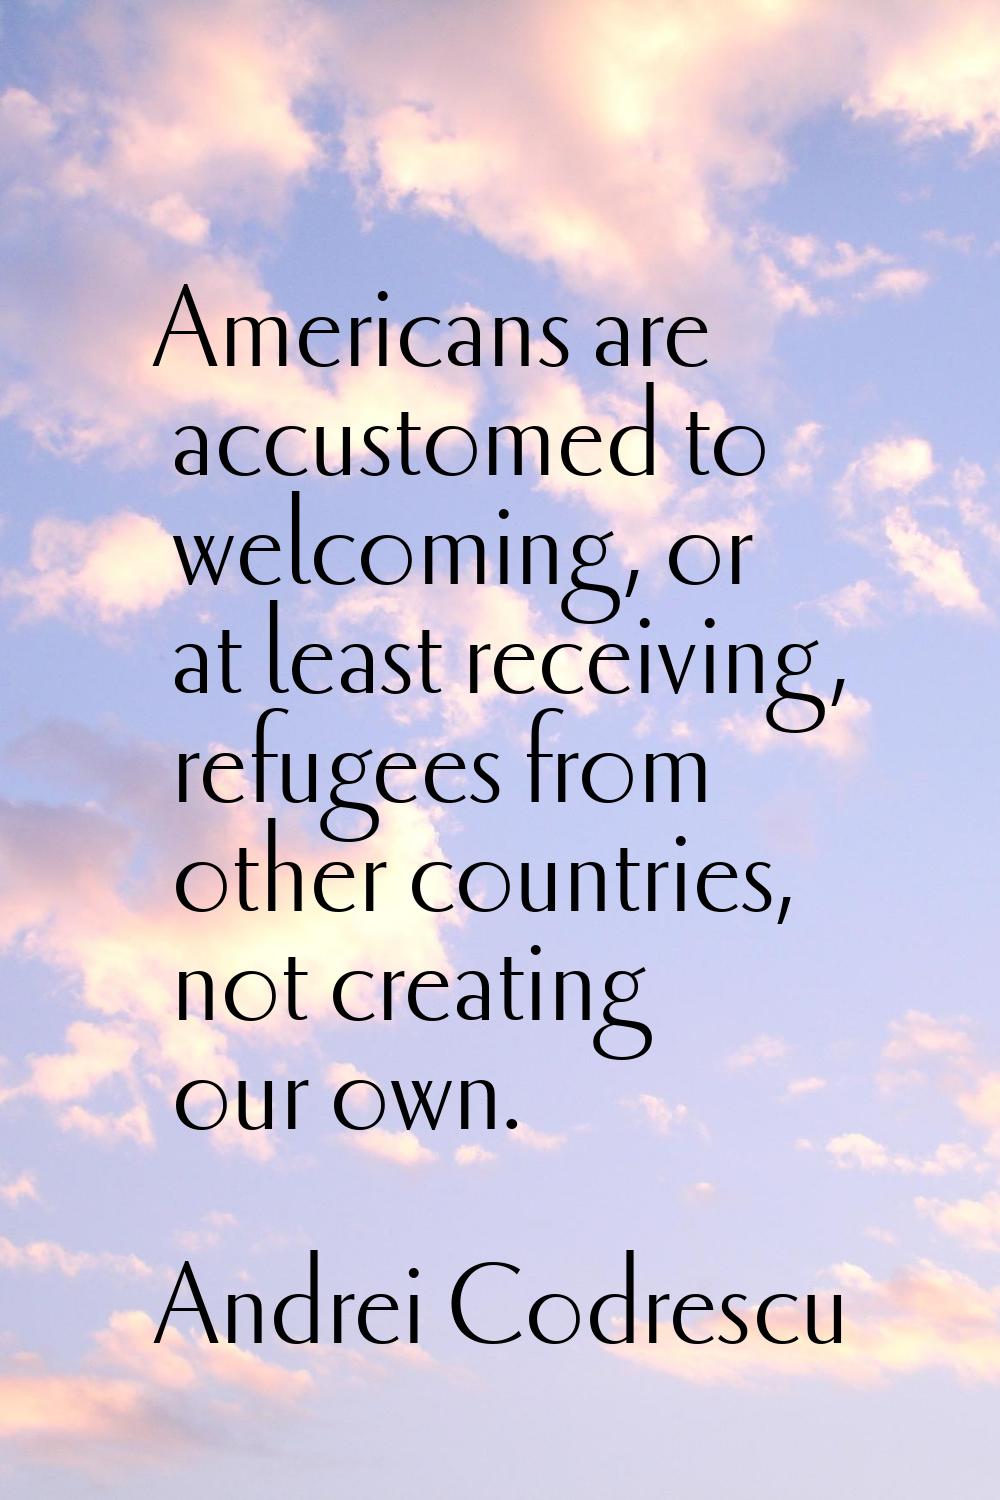 Americans are accustomed to welcoming, or at least receiving, refugees from other countries, not cr